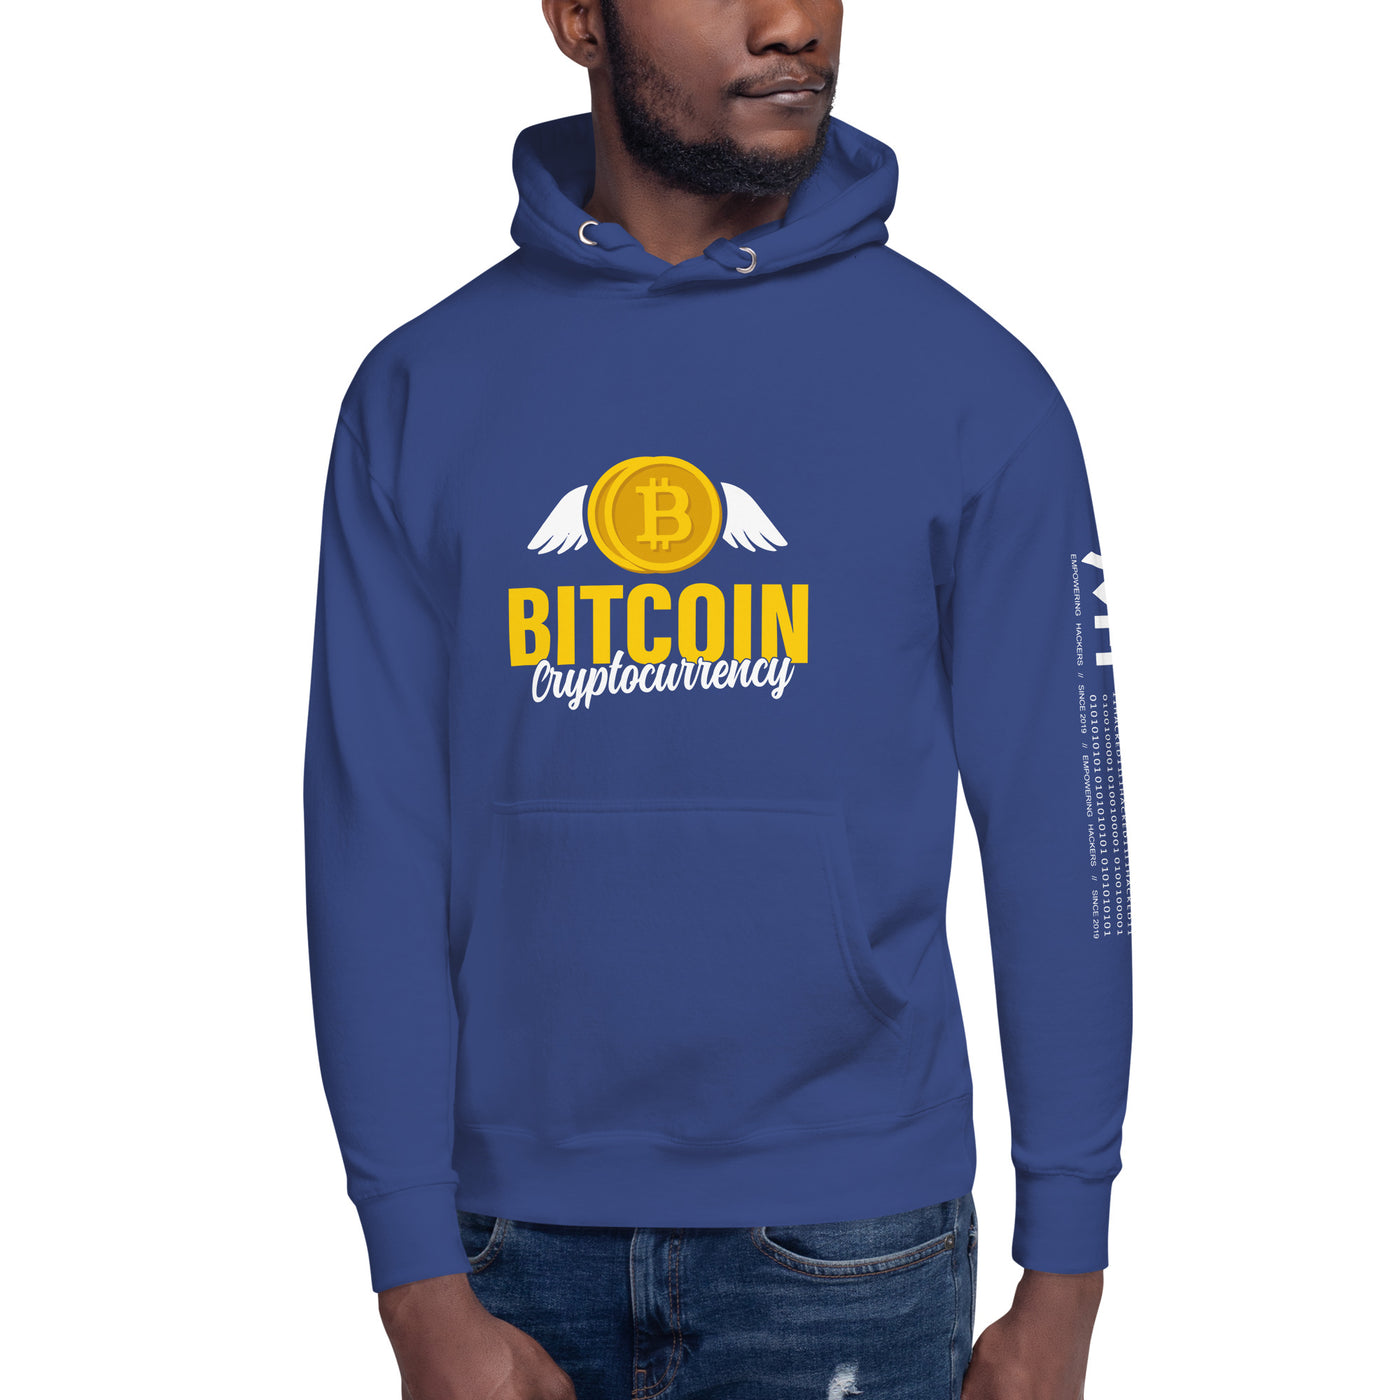 Bitcoin Cryptocurrency - Unisex Hoodie